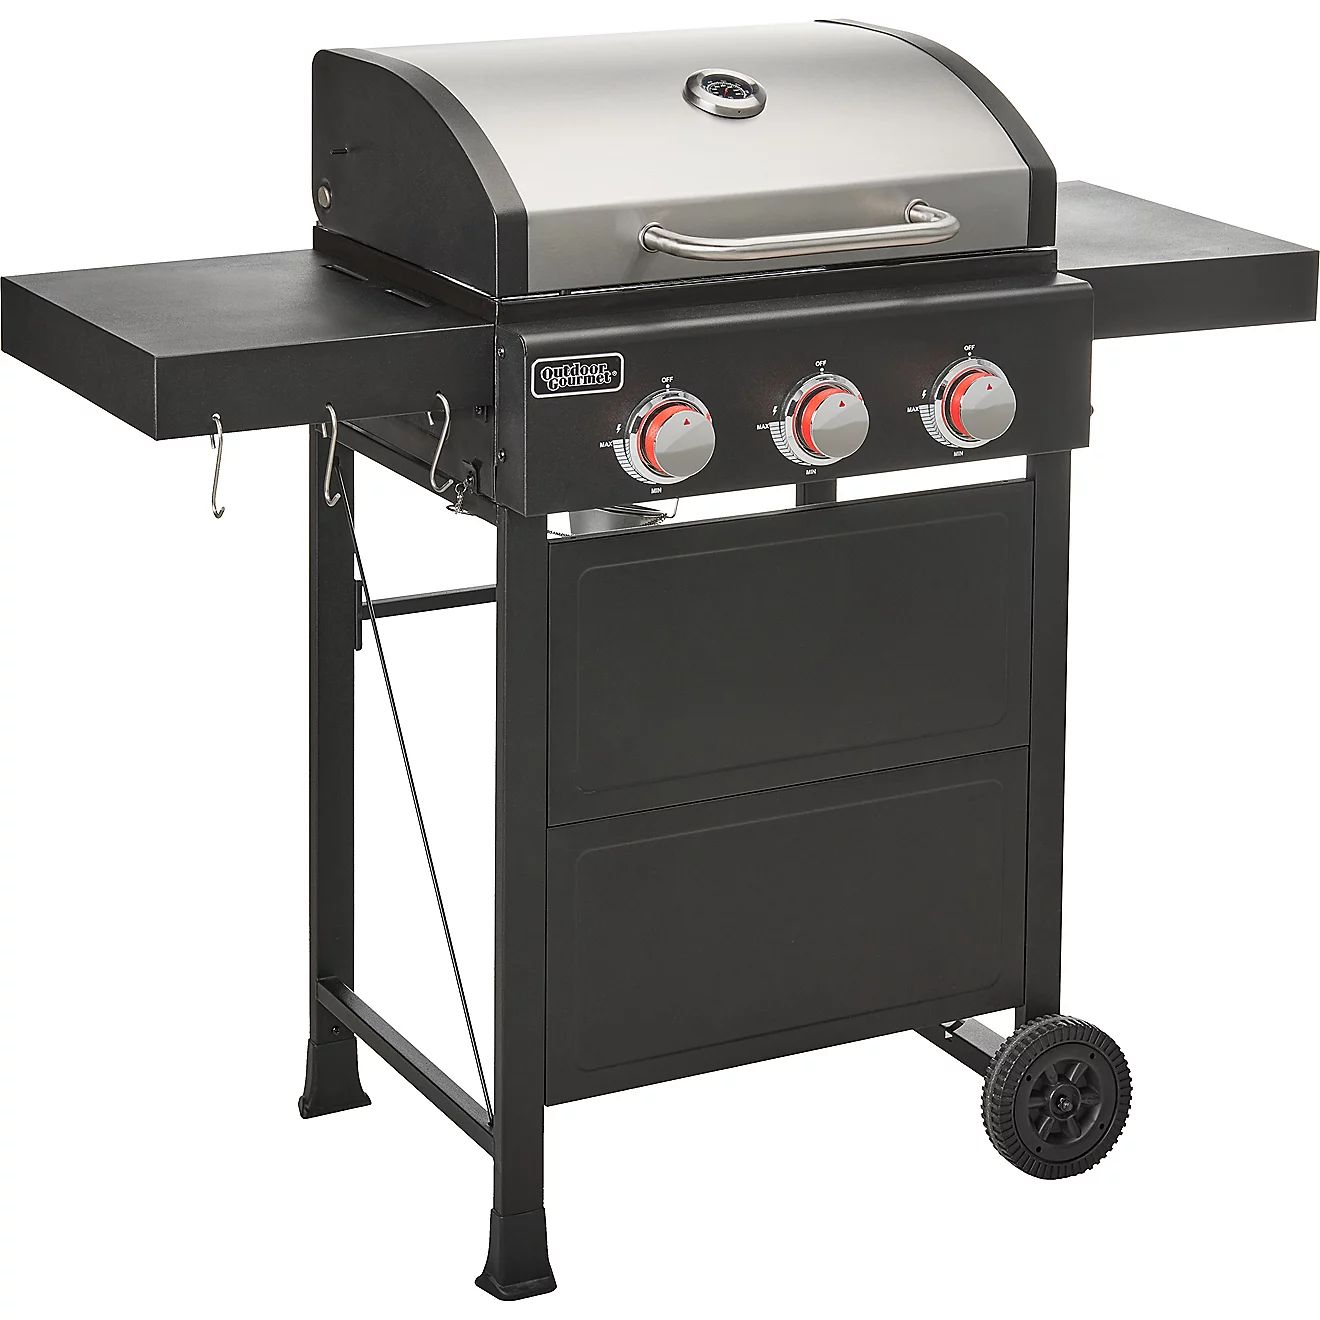 Outdoor Gourmet 3-Burner Gas Grill | Academy Sports + Outdoors